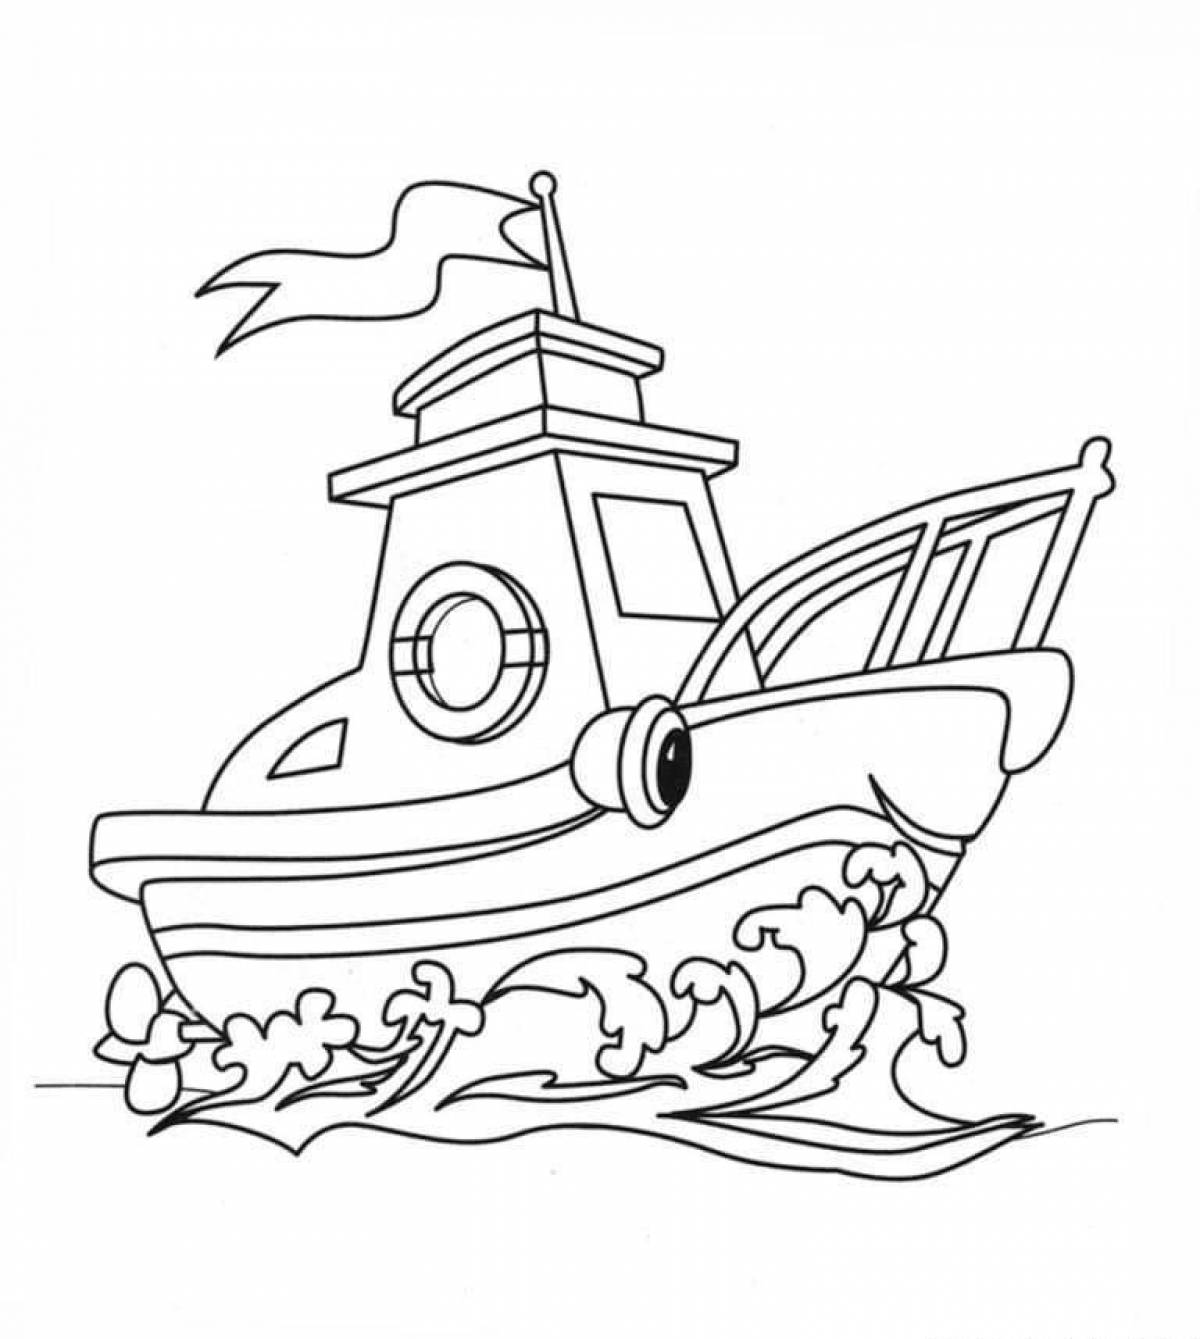 Amazing boat coloring book for kids